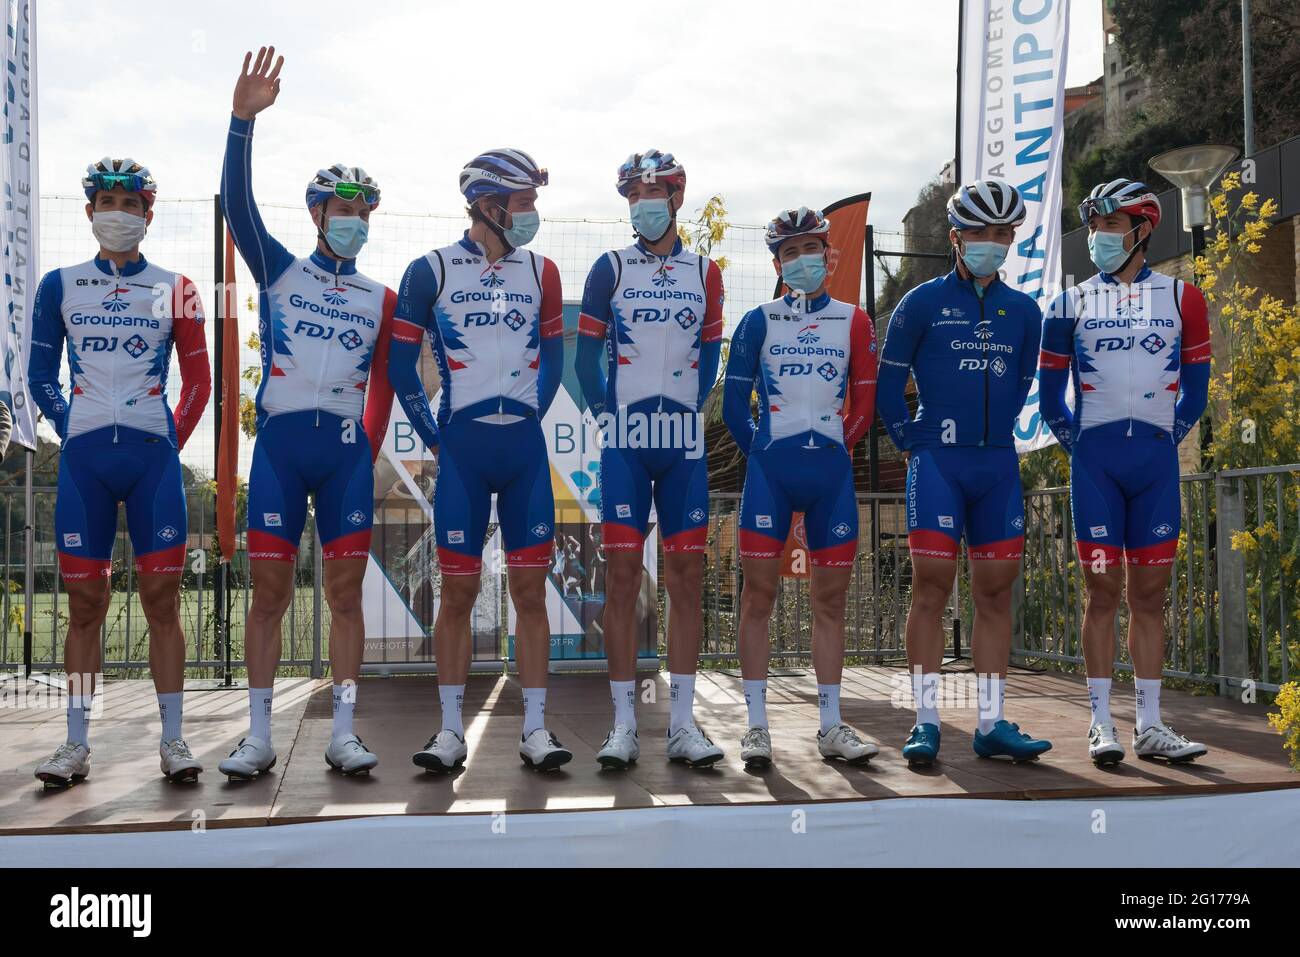 Groupama- FDJ team pose for a group photo during the official presentation  before the start of the first stage of the Tour des Alpes-Maritimes et du  Var. The 53rd edition of the